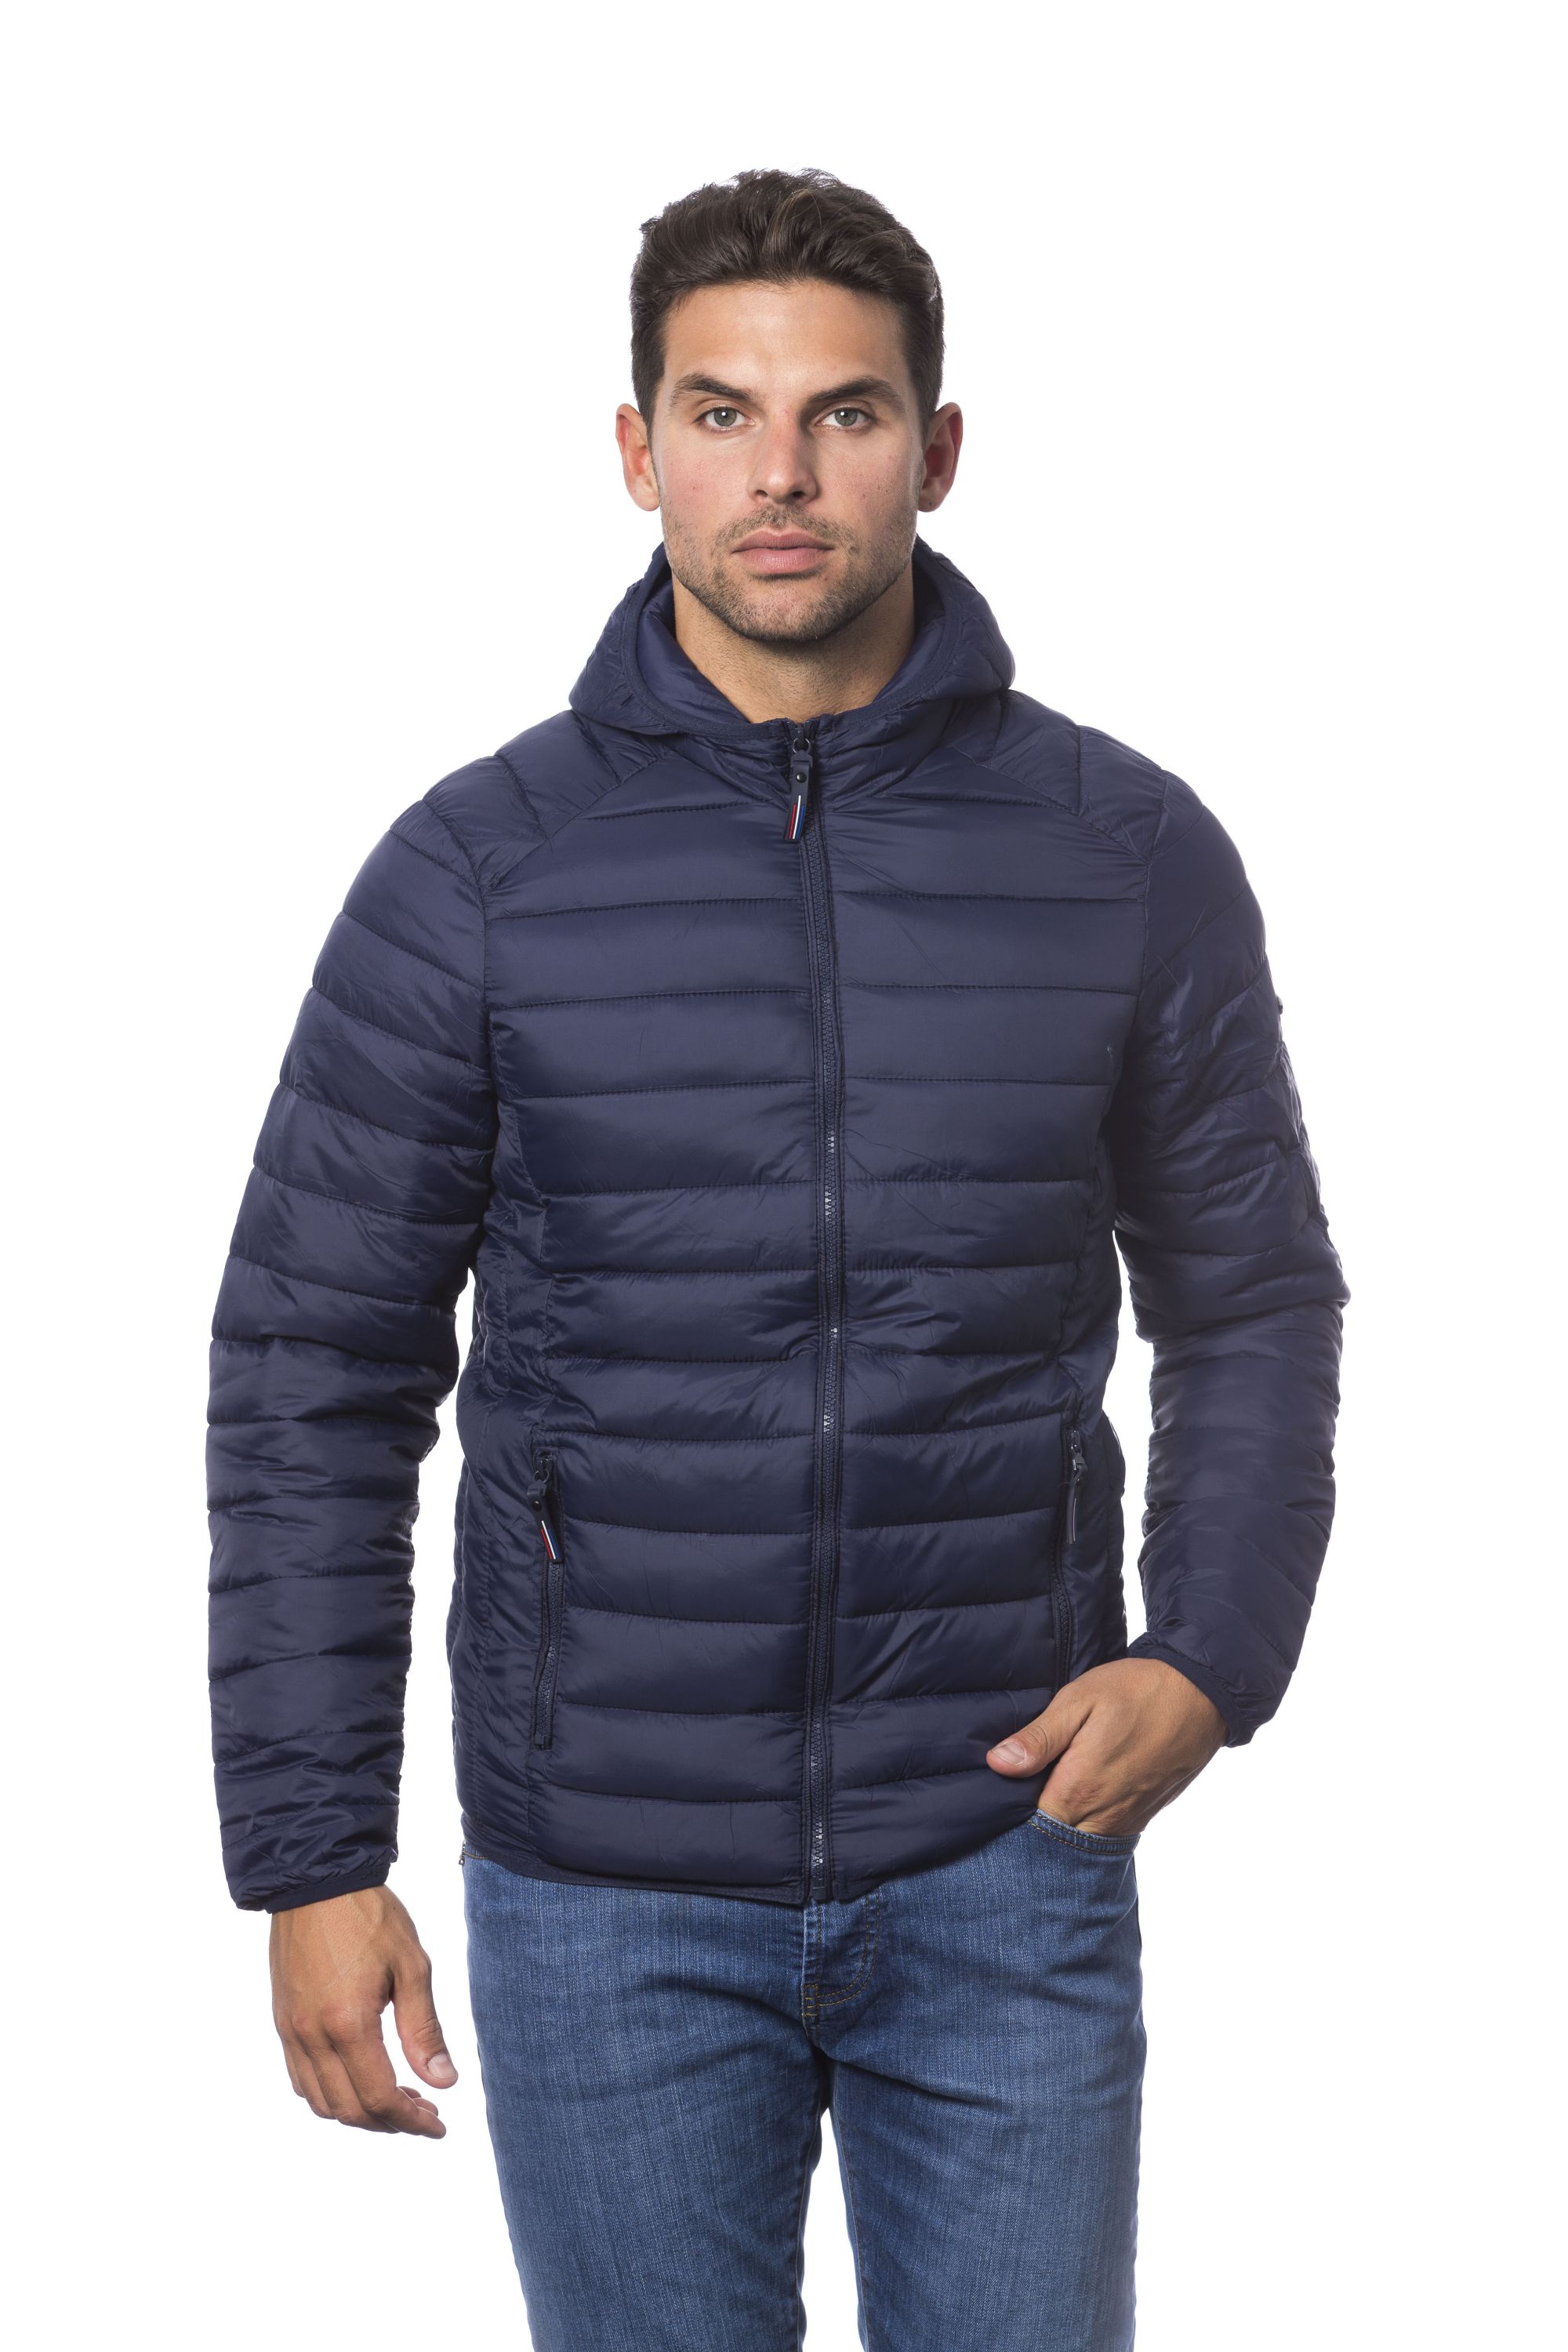 Trussardi Collection Mens Jackets EuropeStock offers | GLOBAL STOCKS